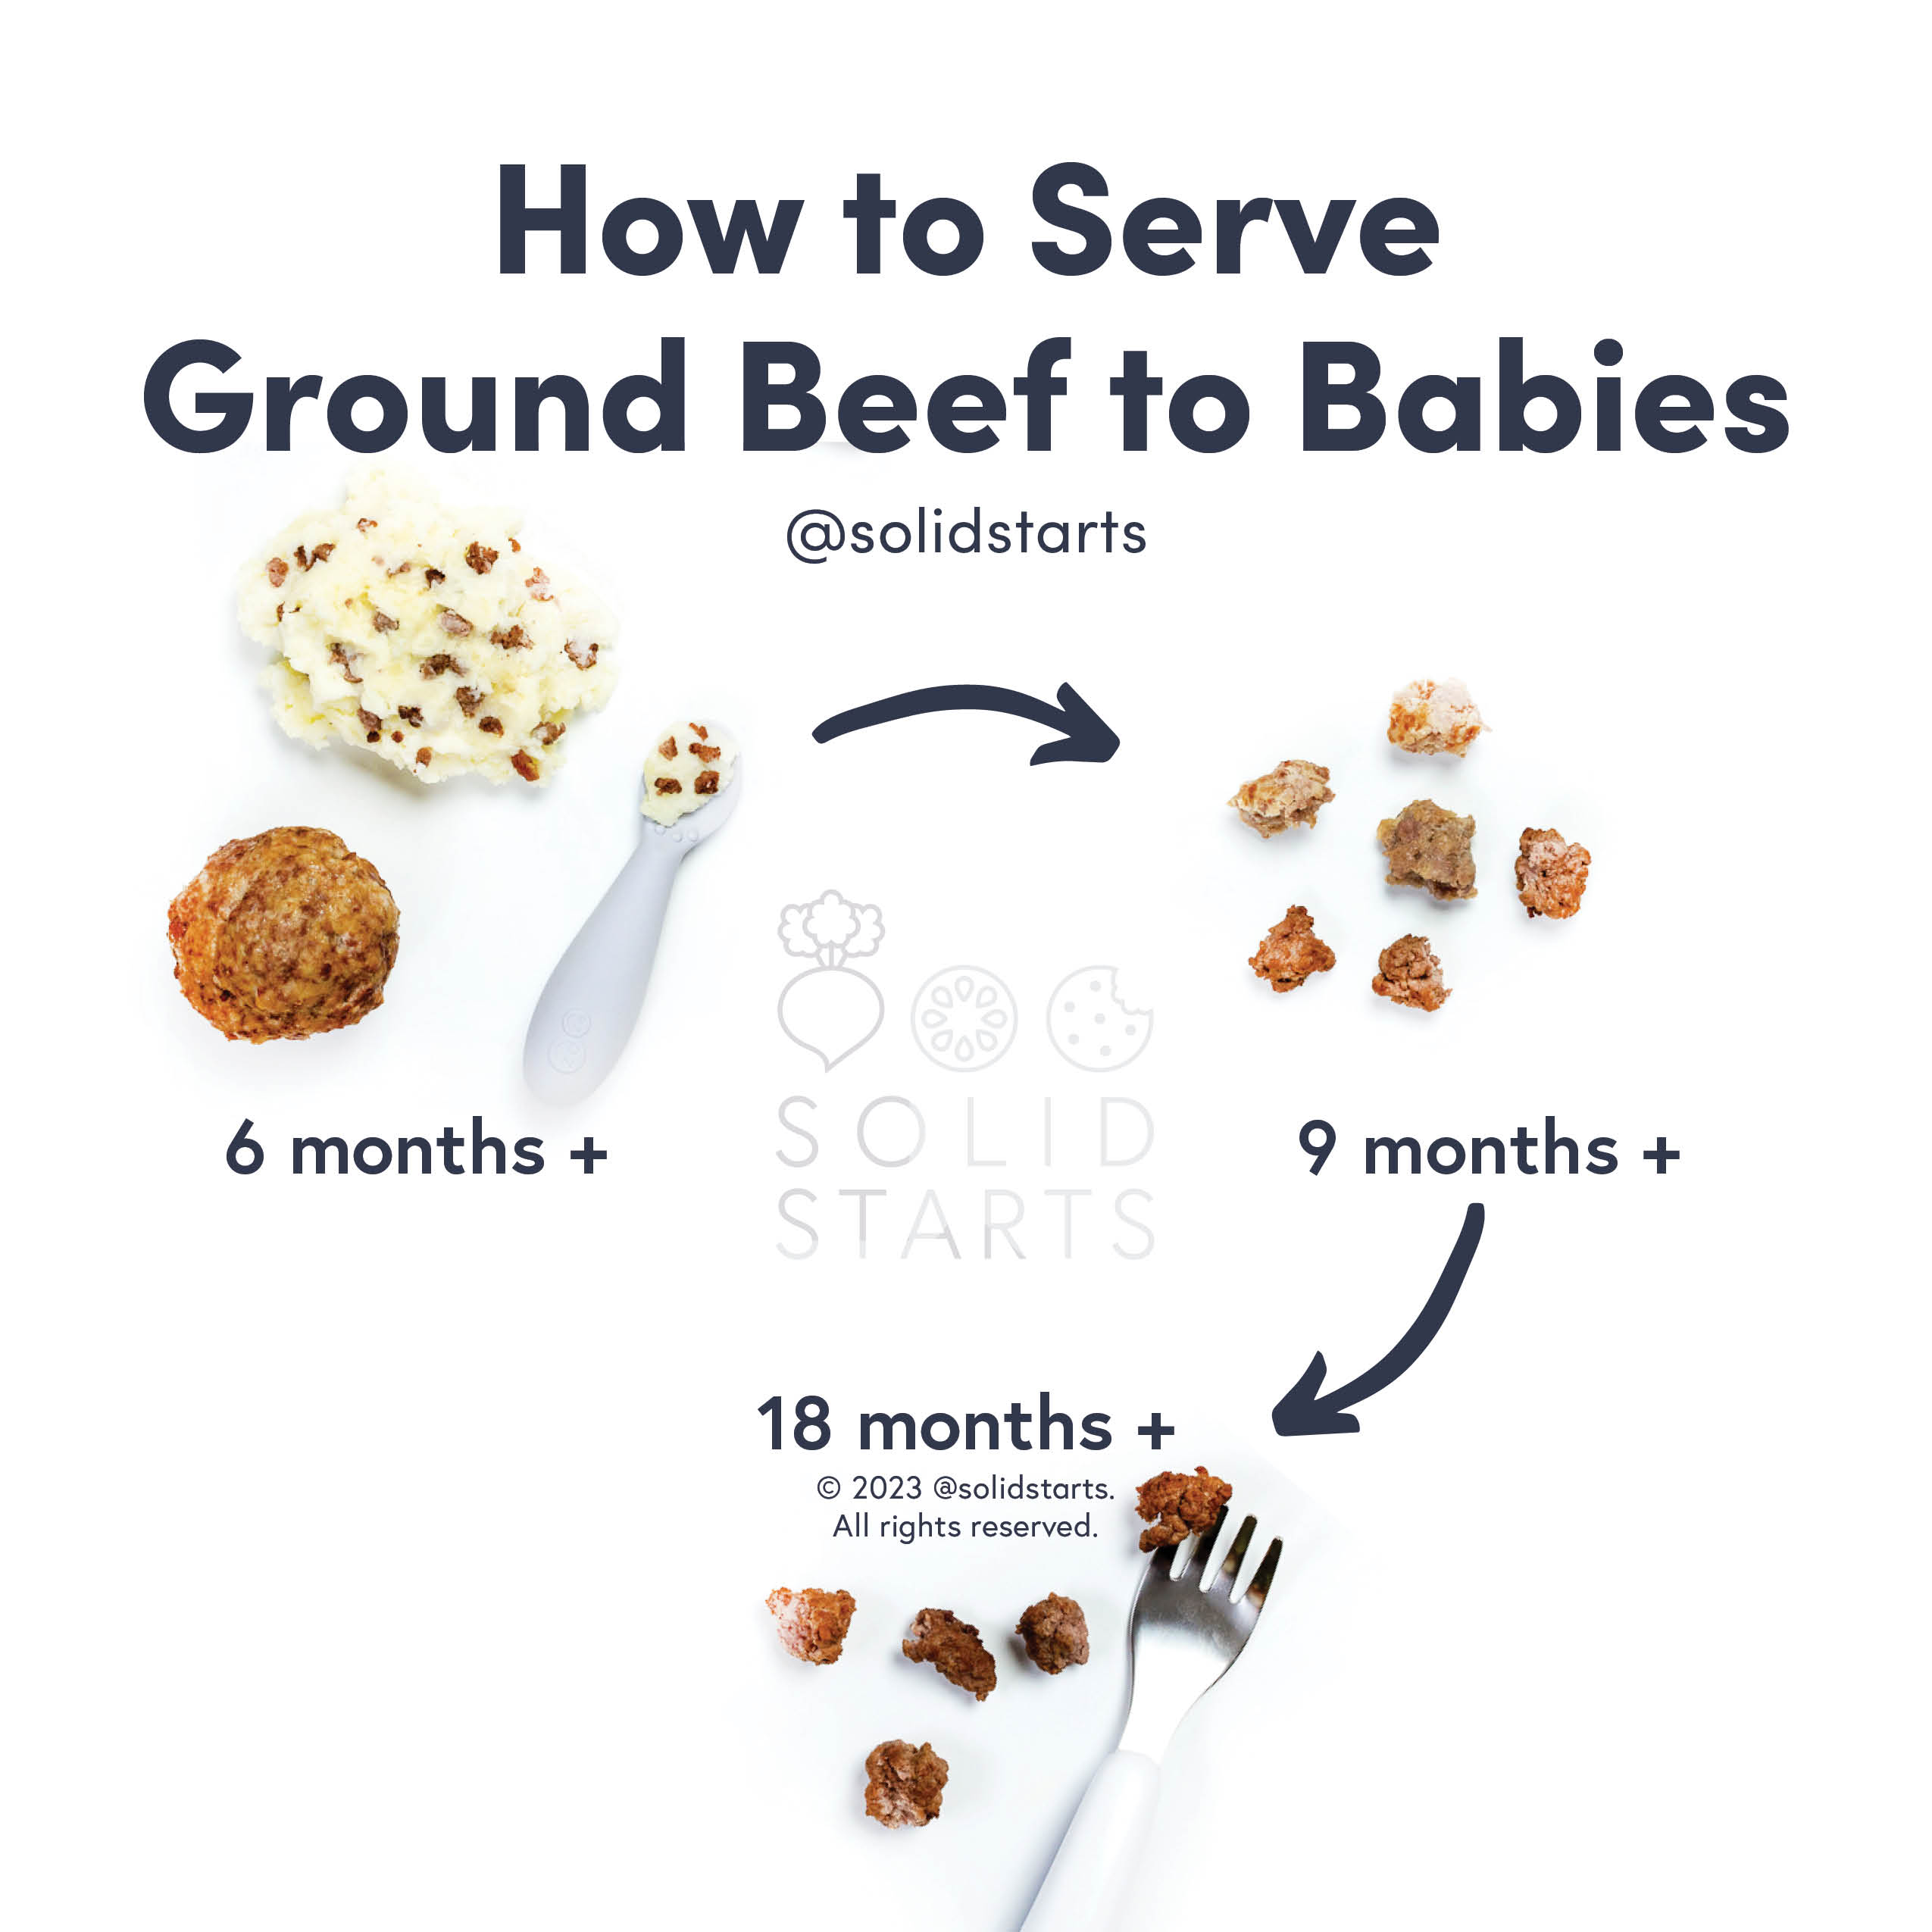 How to Serve Ground Beef to Babies